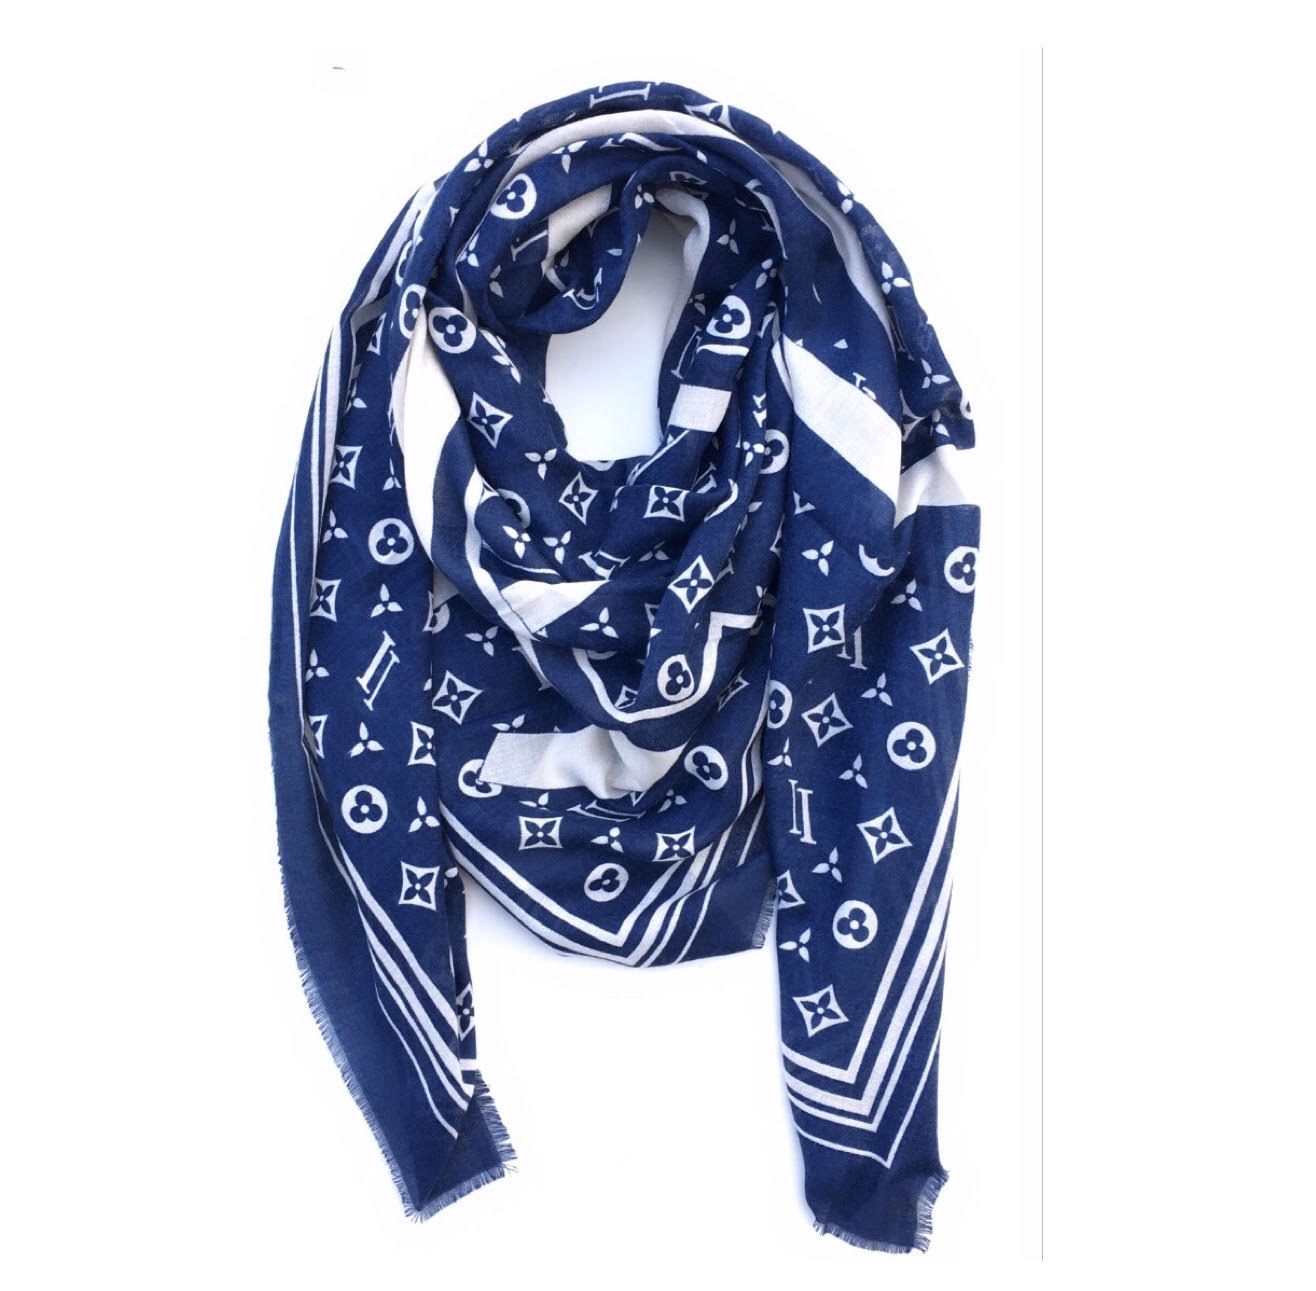 The Louis Navy Scarf